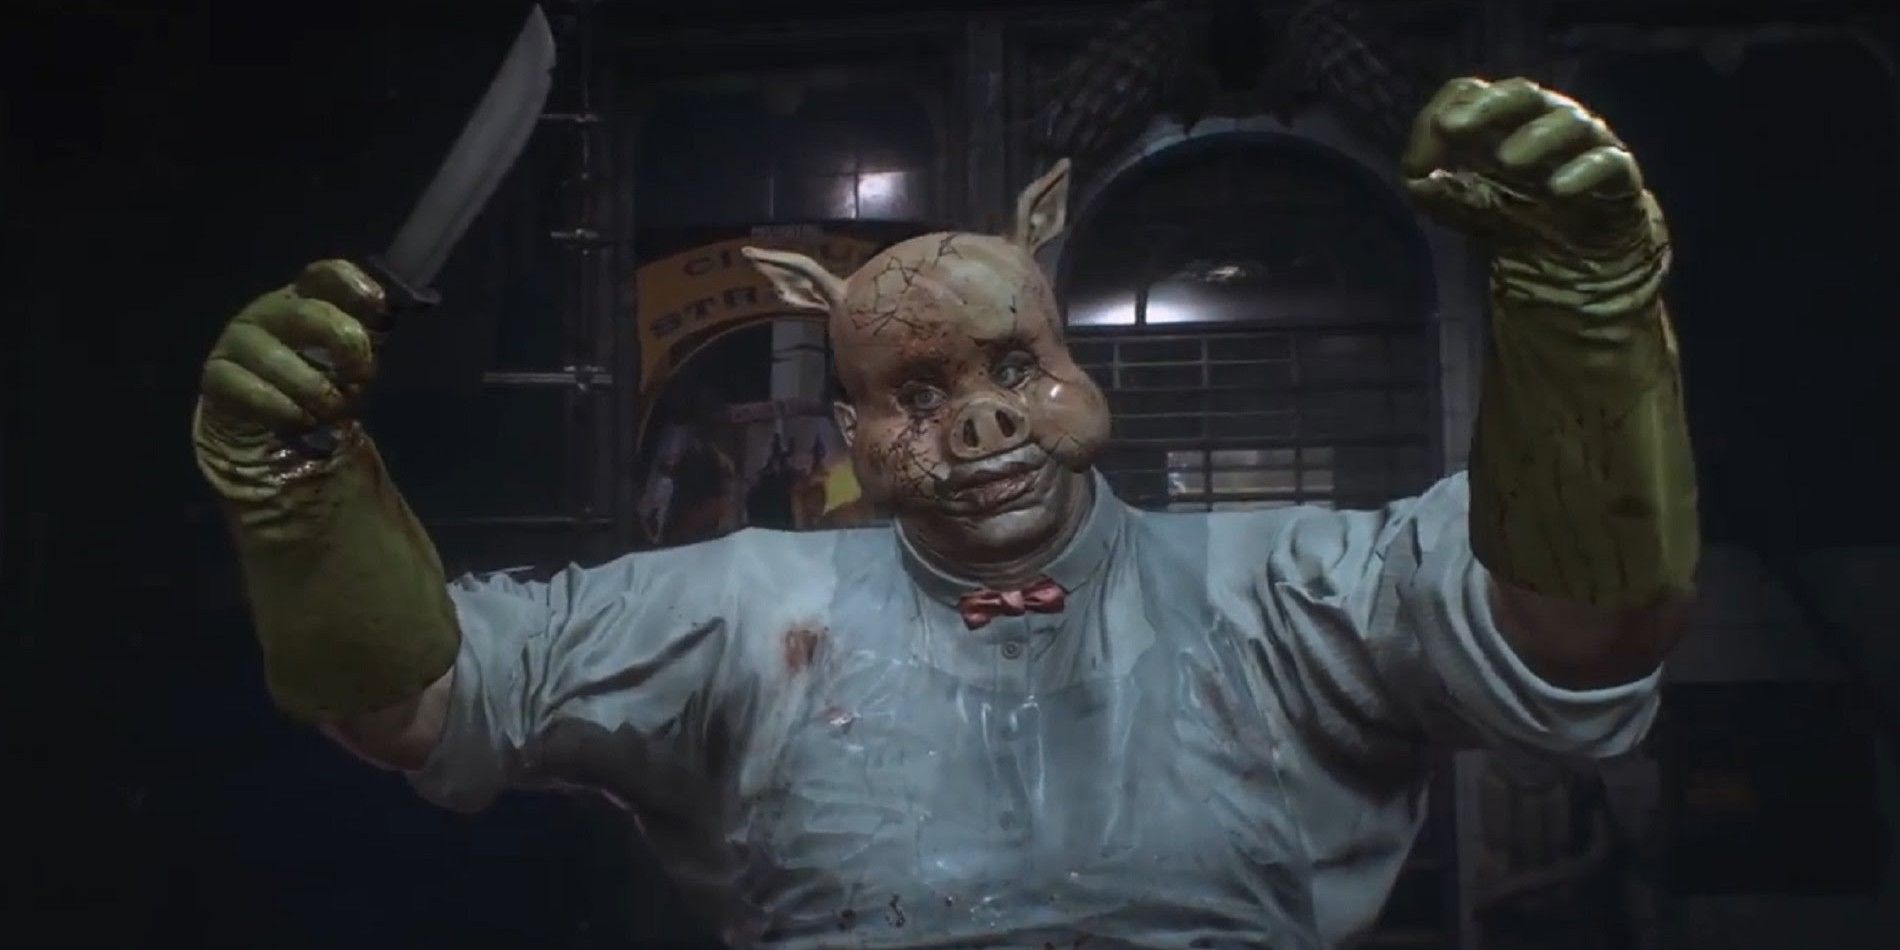 Professor Pyg in Arkham Knight in his pig mask